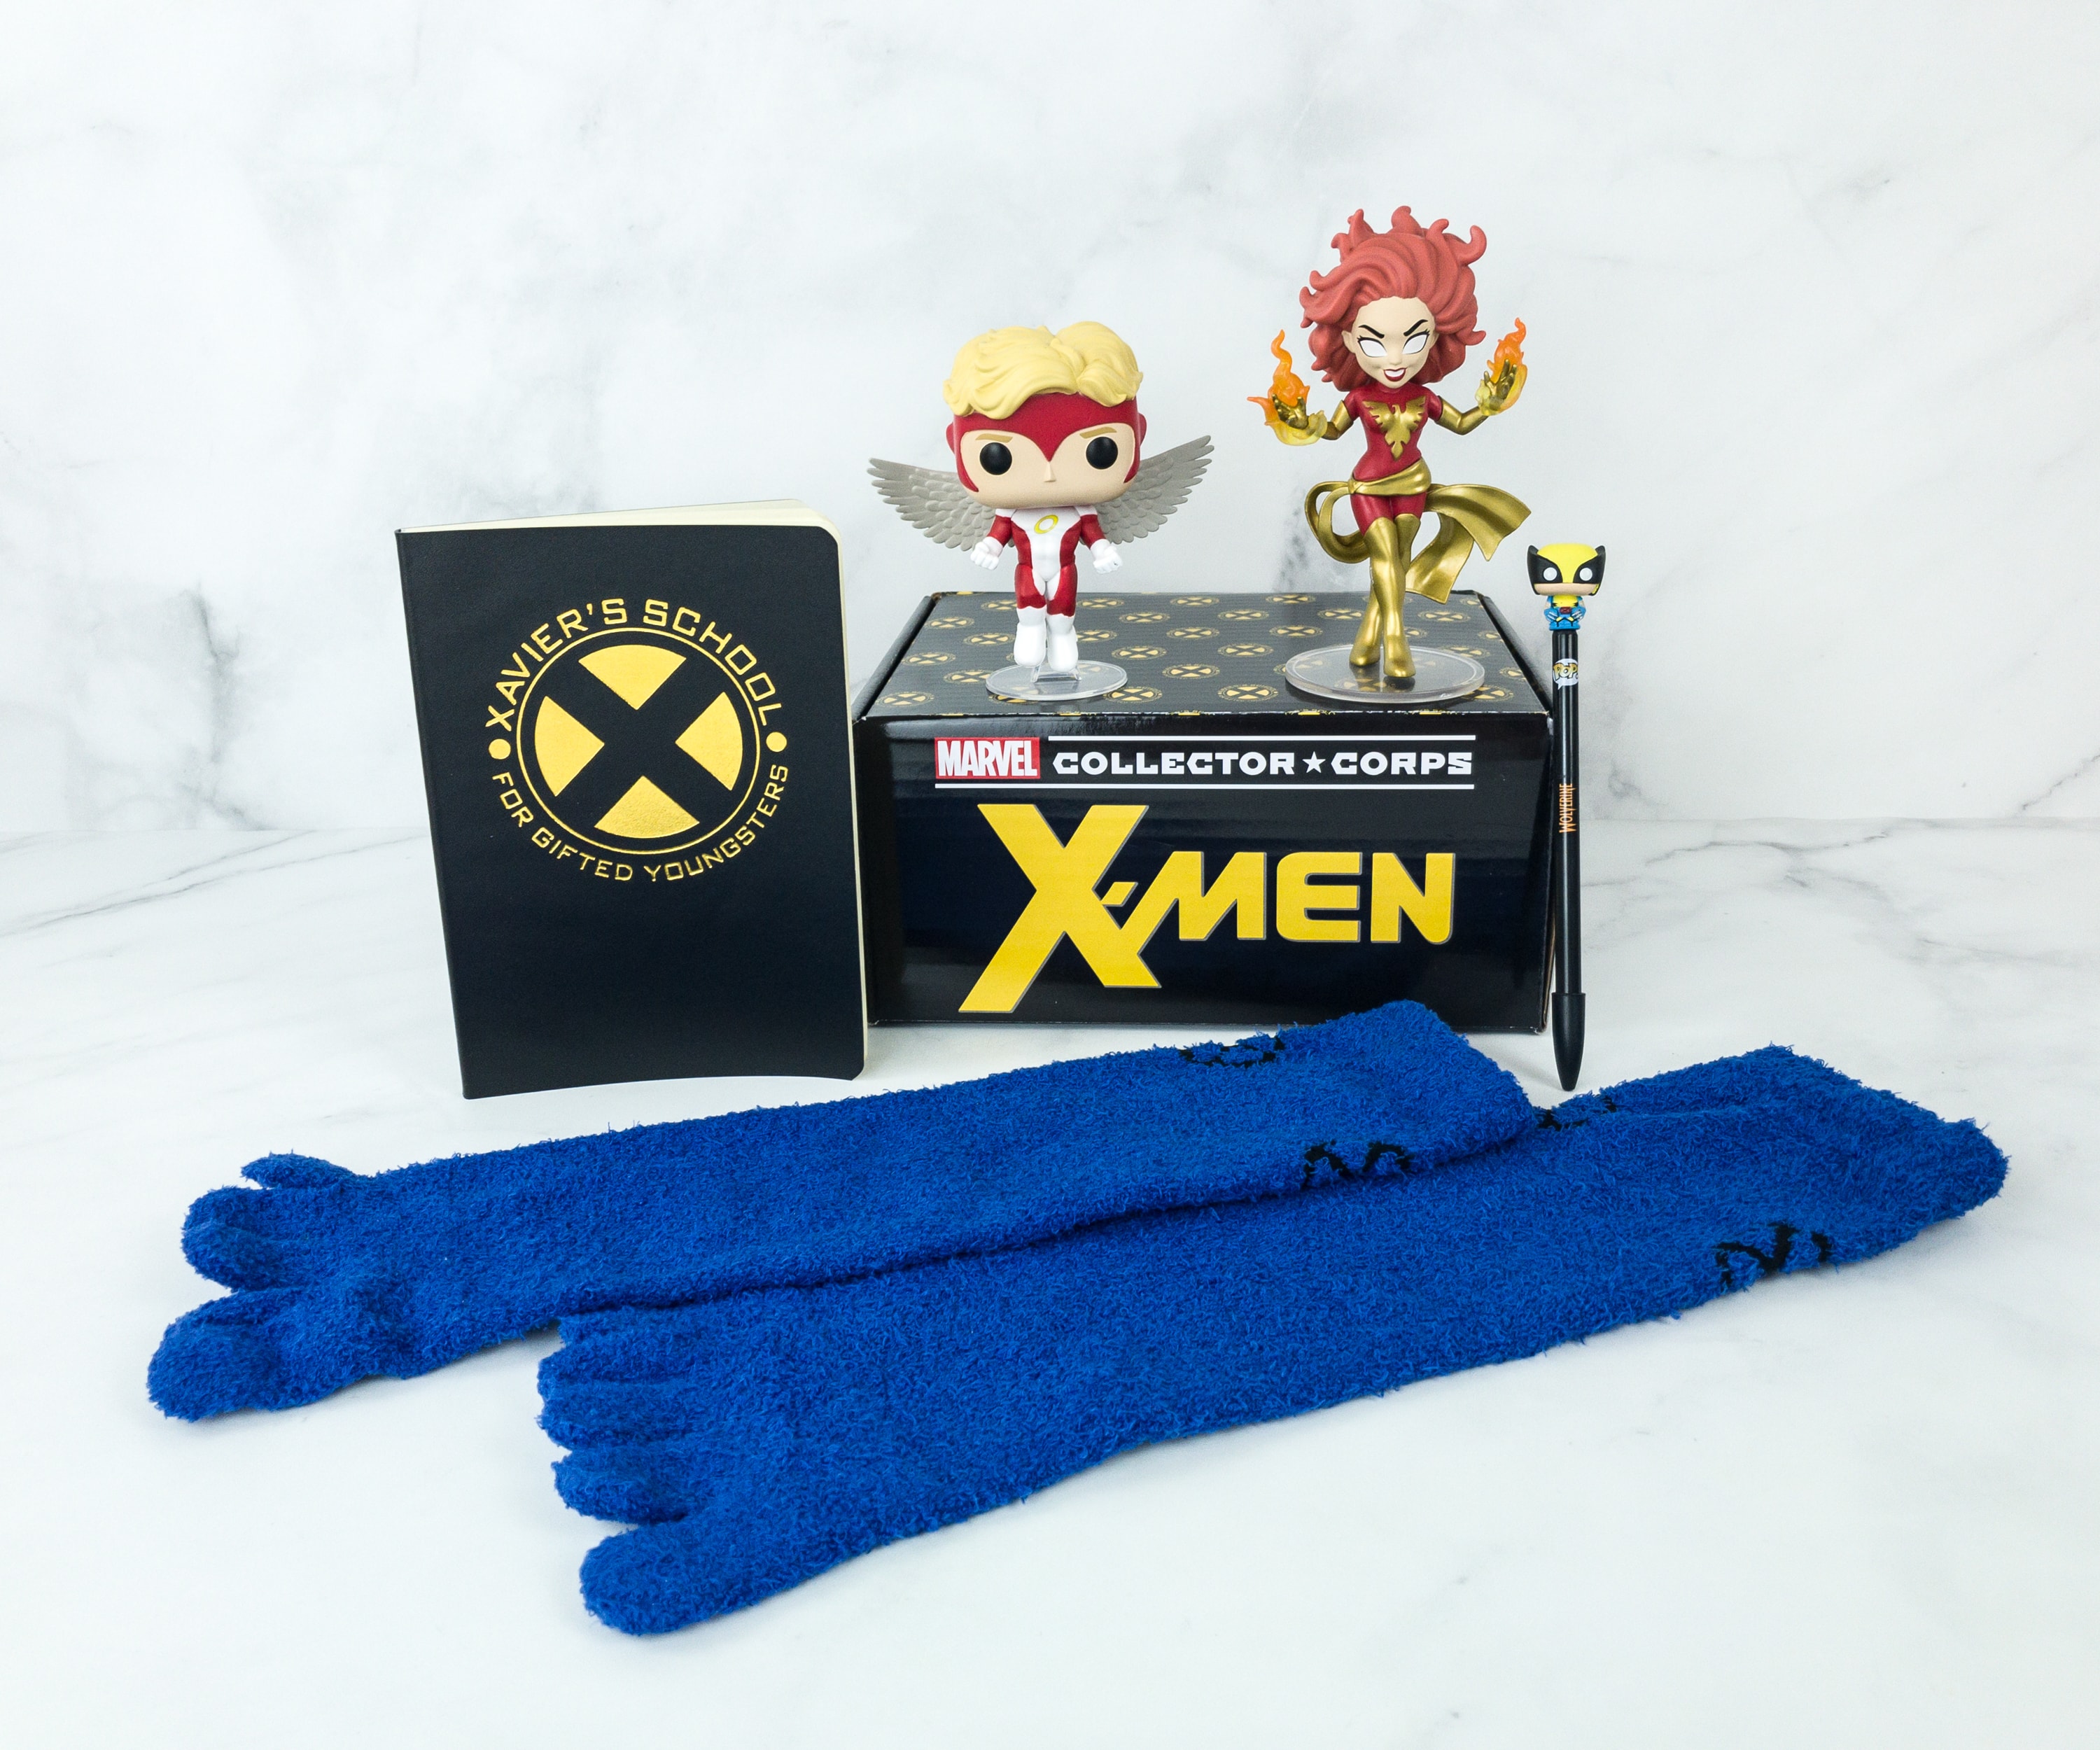 Marvel Collector Corps January 2019 Subscription Box Review